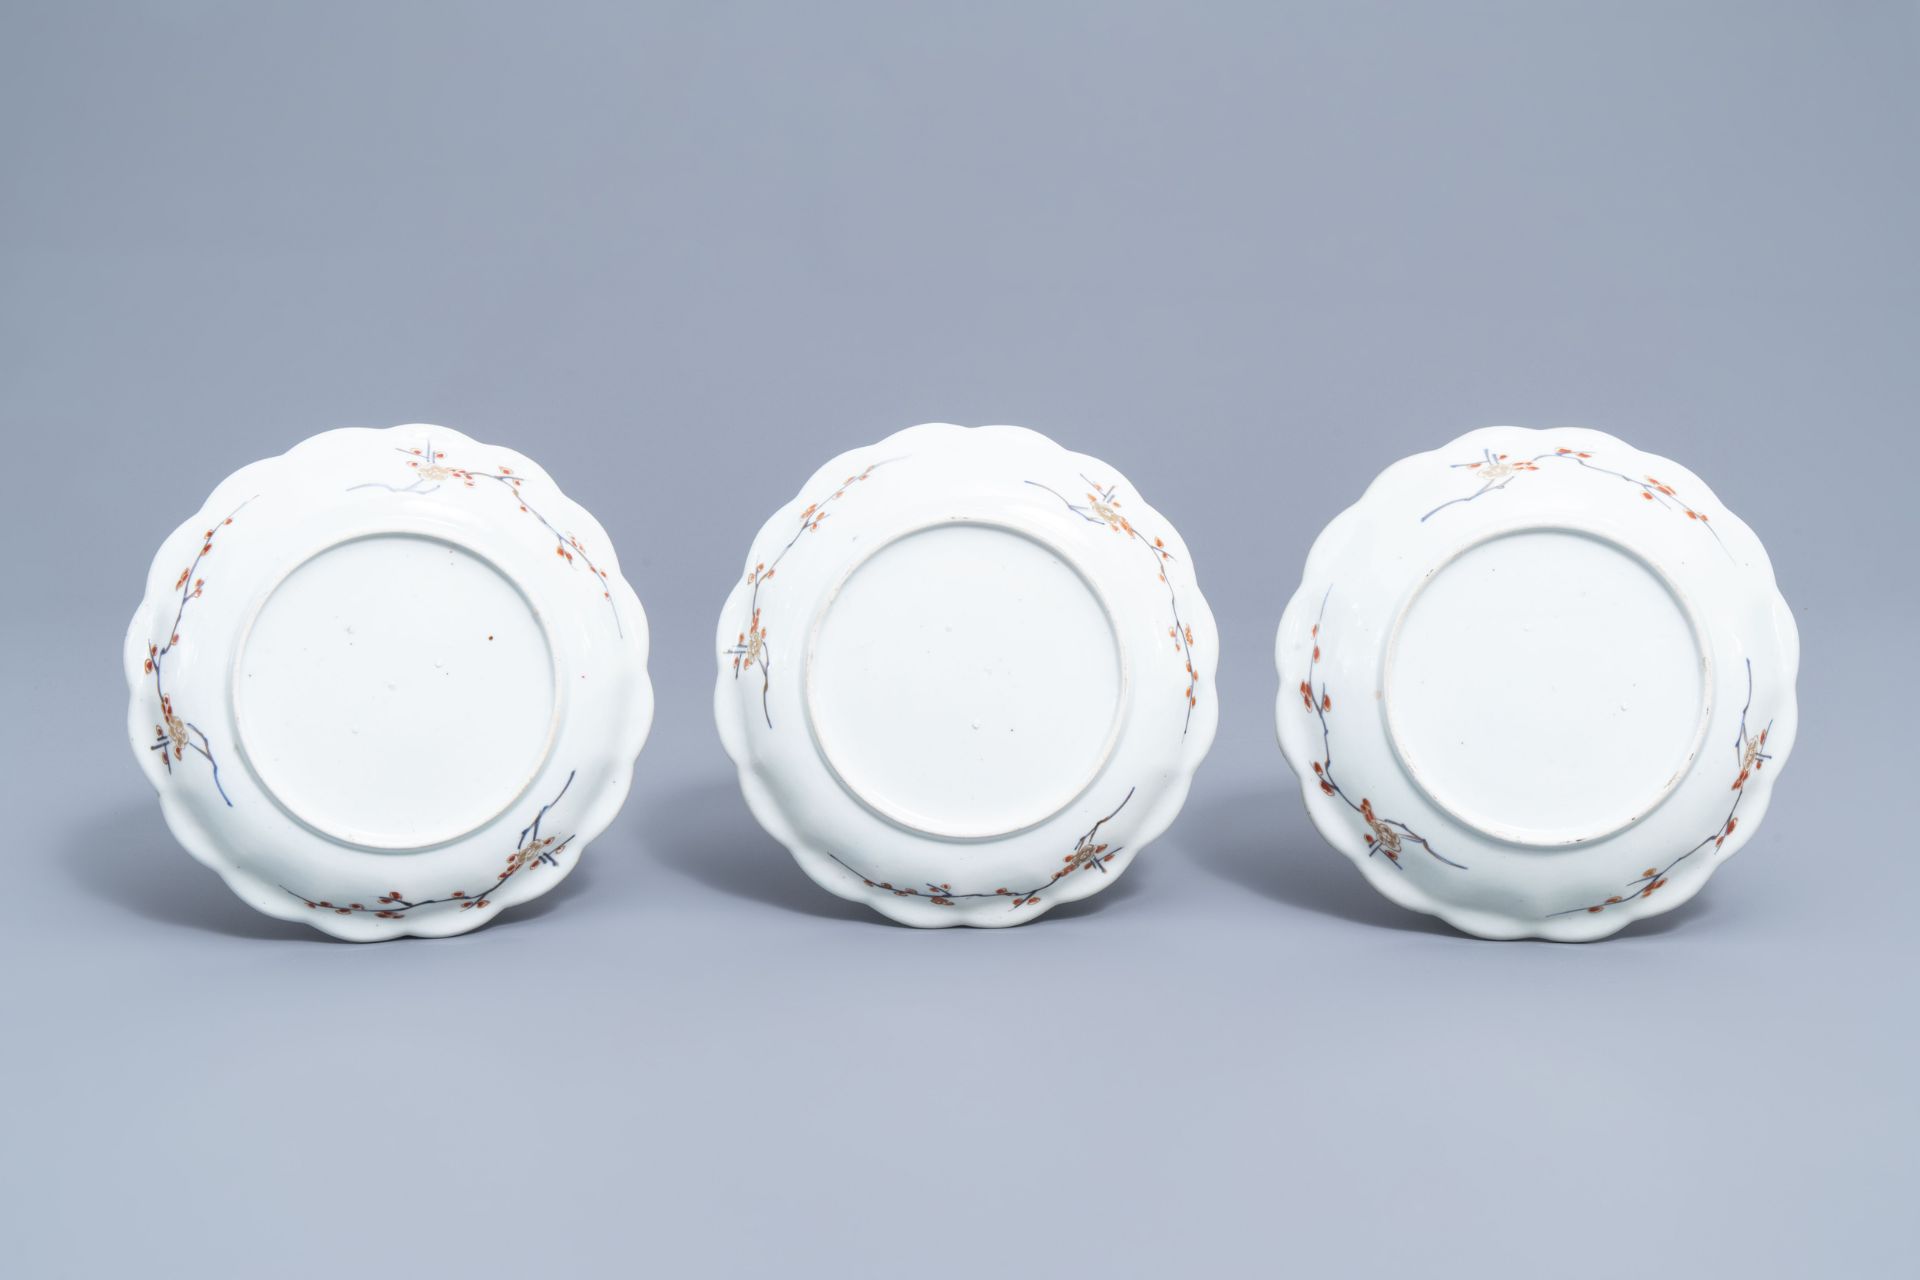 Seven Japanese Imari plates with scalloped rim and floral design, Edo, 18th C. - Image 3 of 7